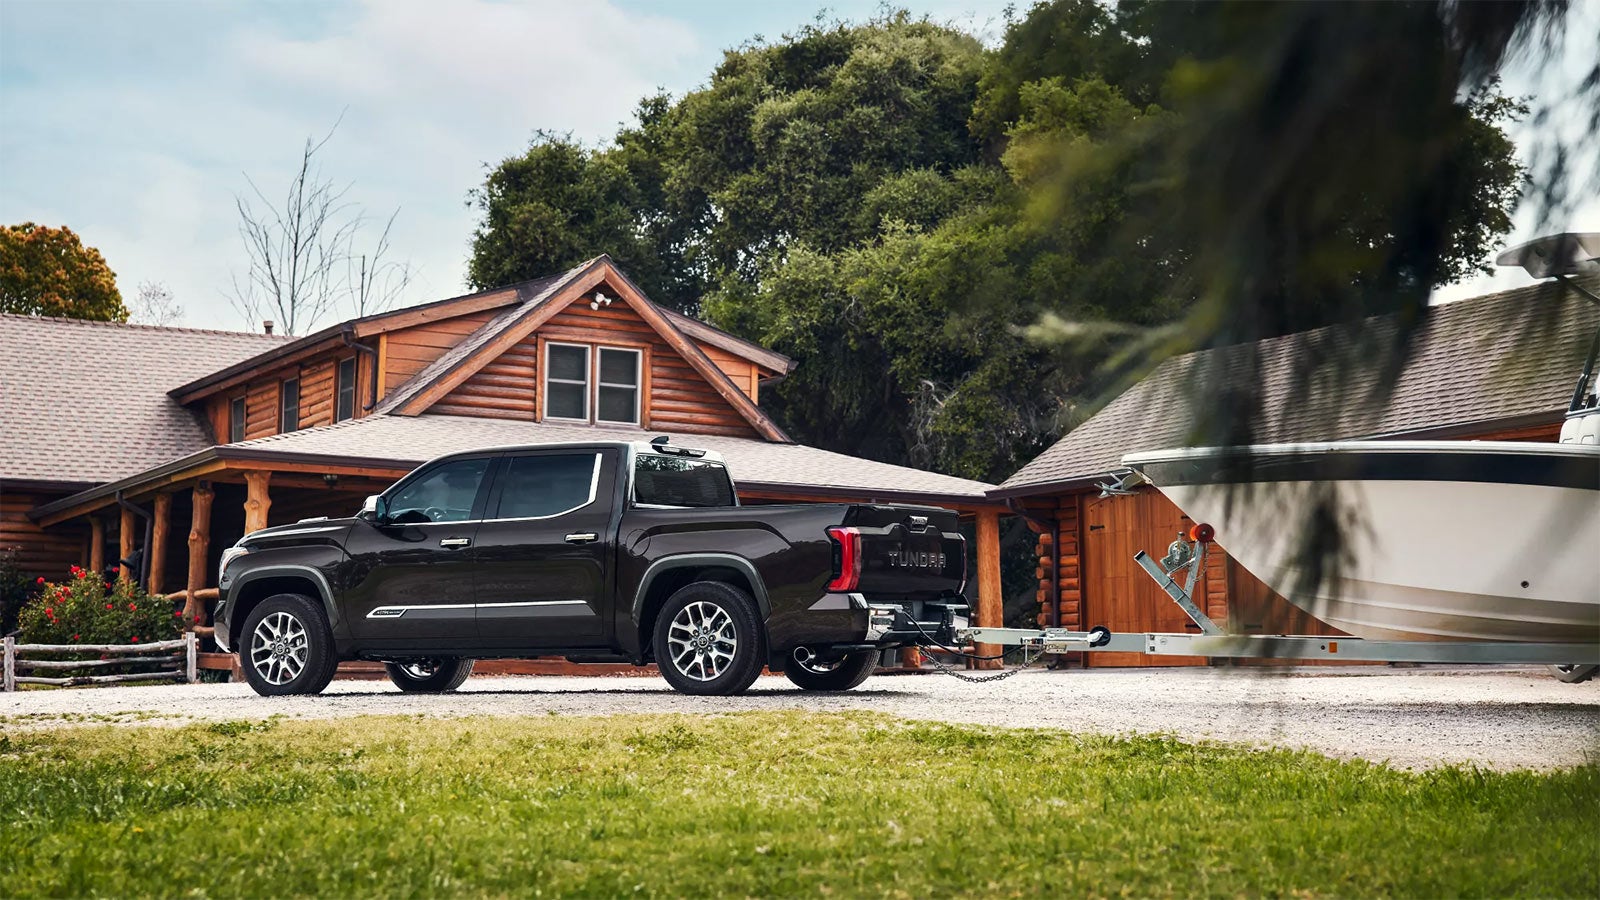 2022 Toyota Tundra Gallery | Sunrise Toyota North in Middle Island NY